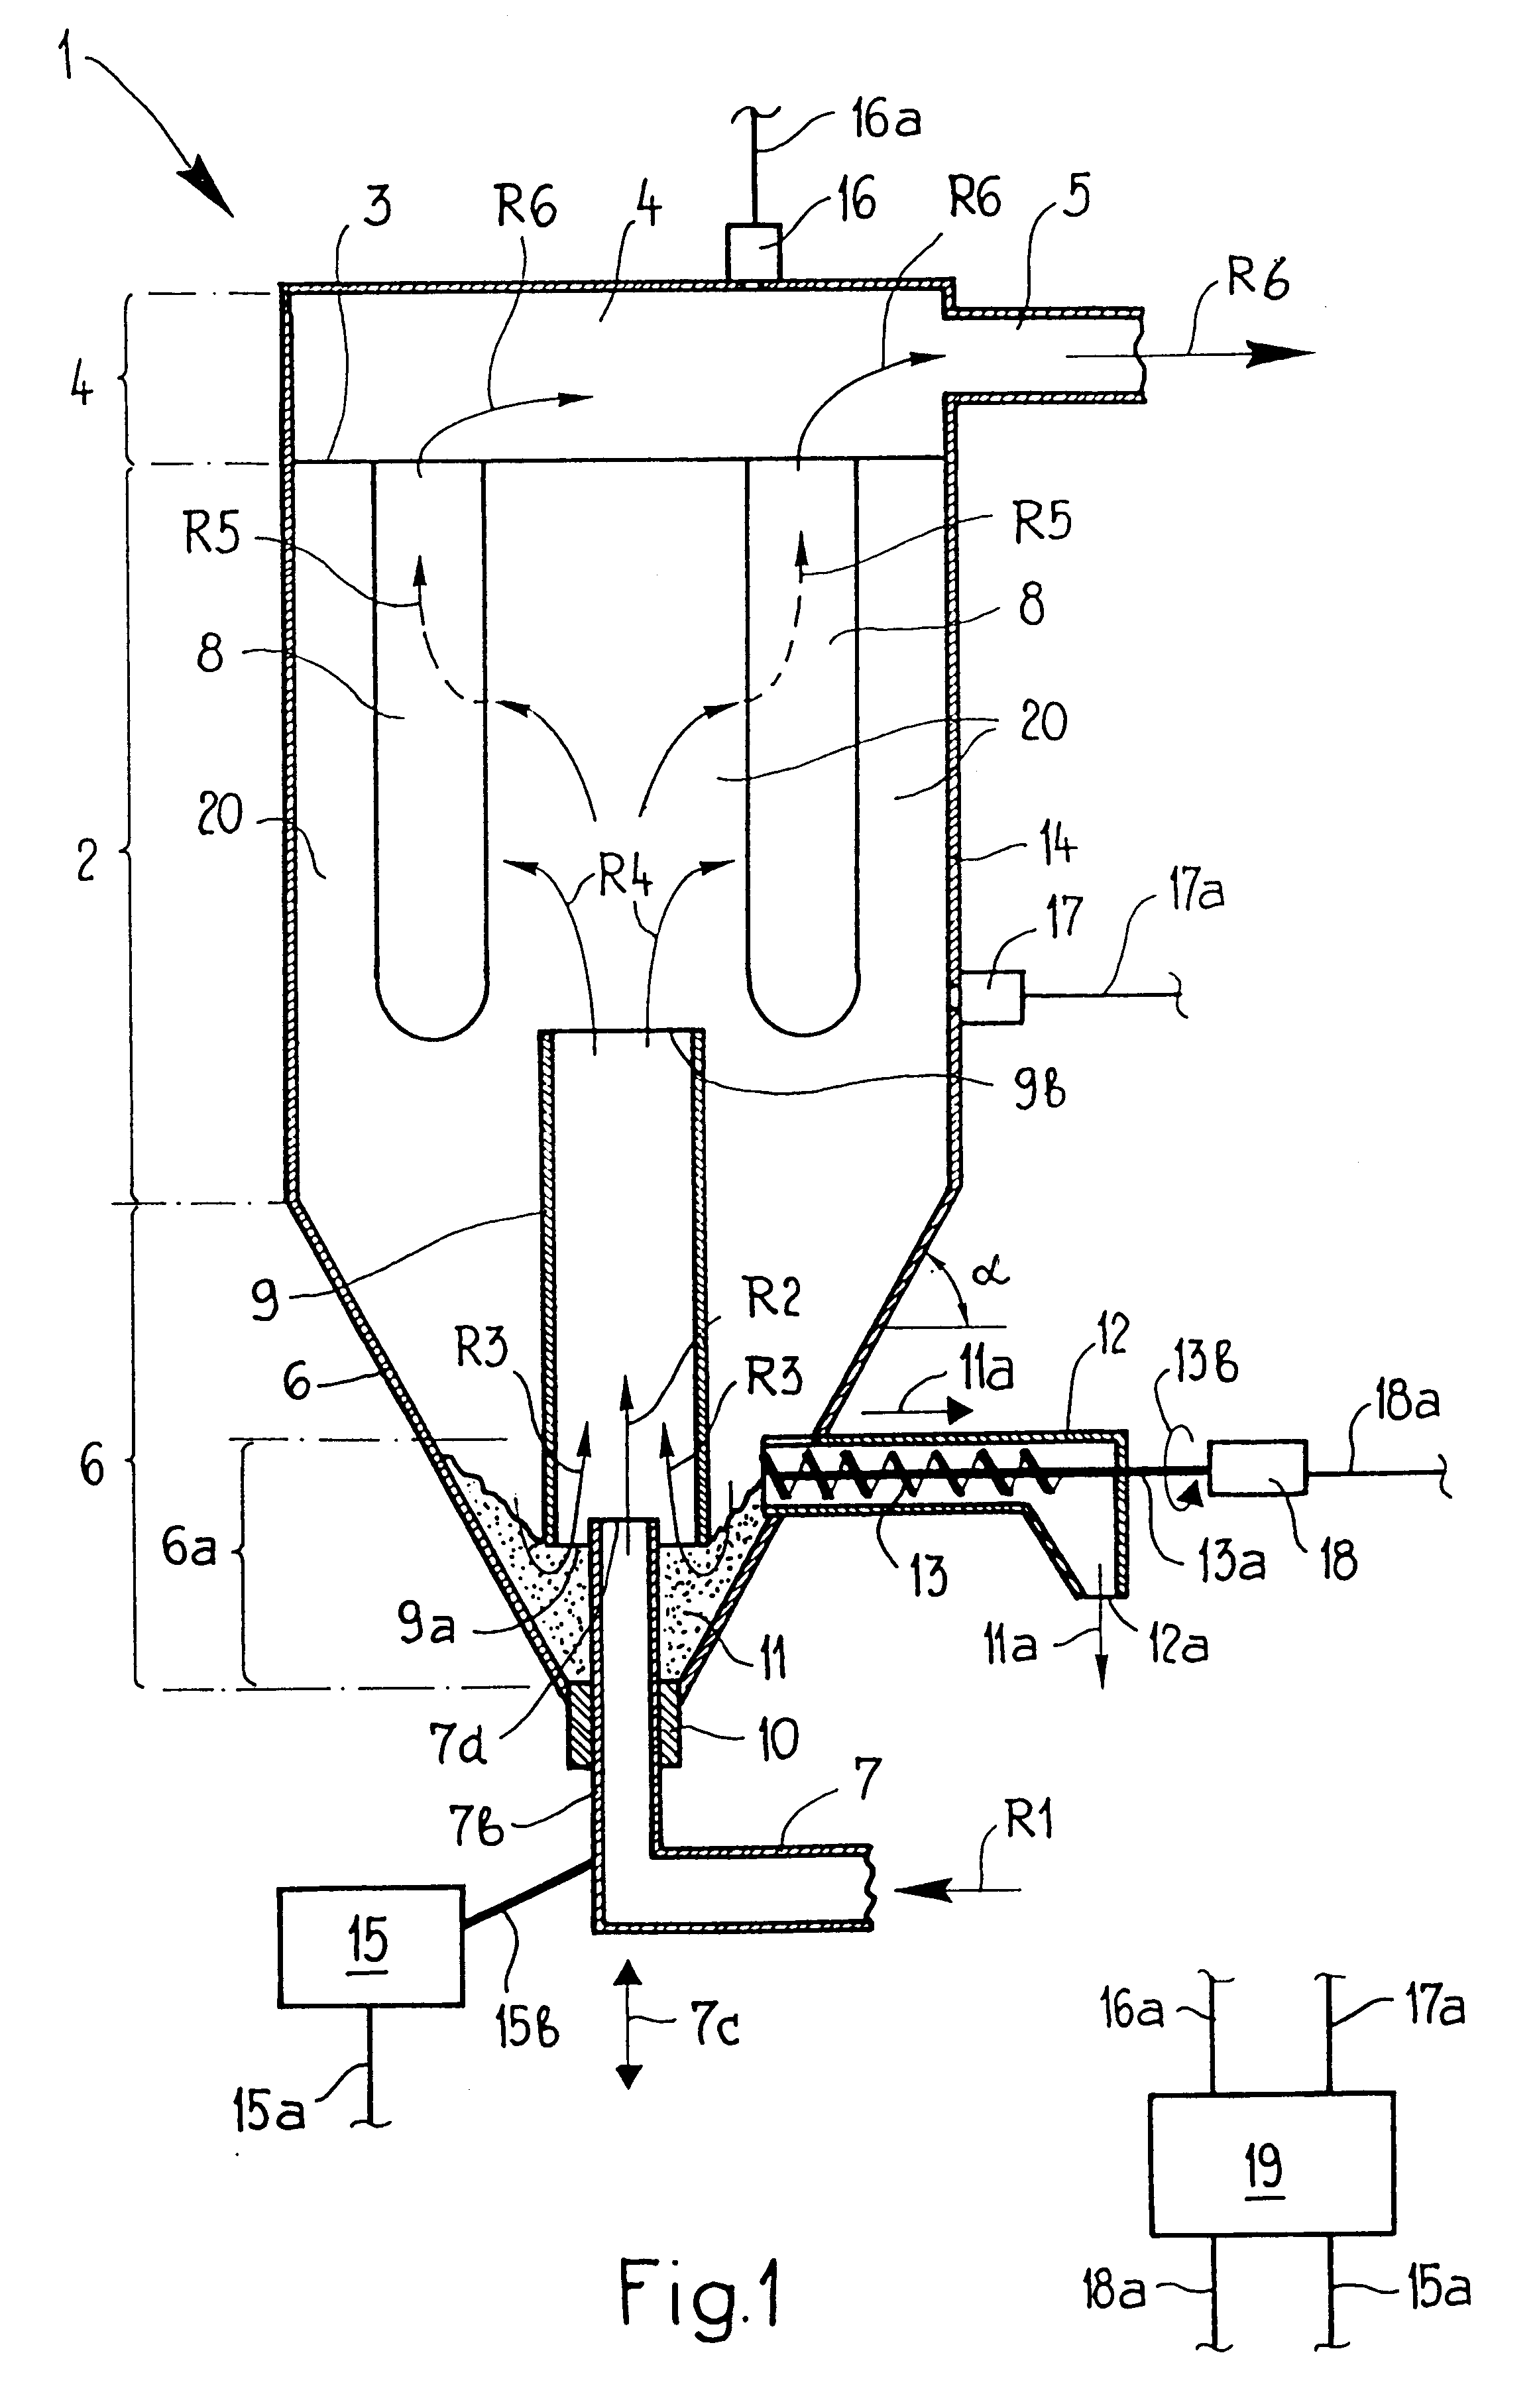 Device and process for adsorption or chemisorption of gaseous constituents from a gas flow